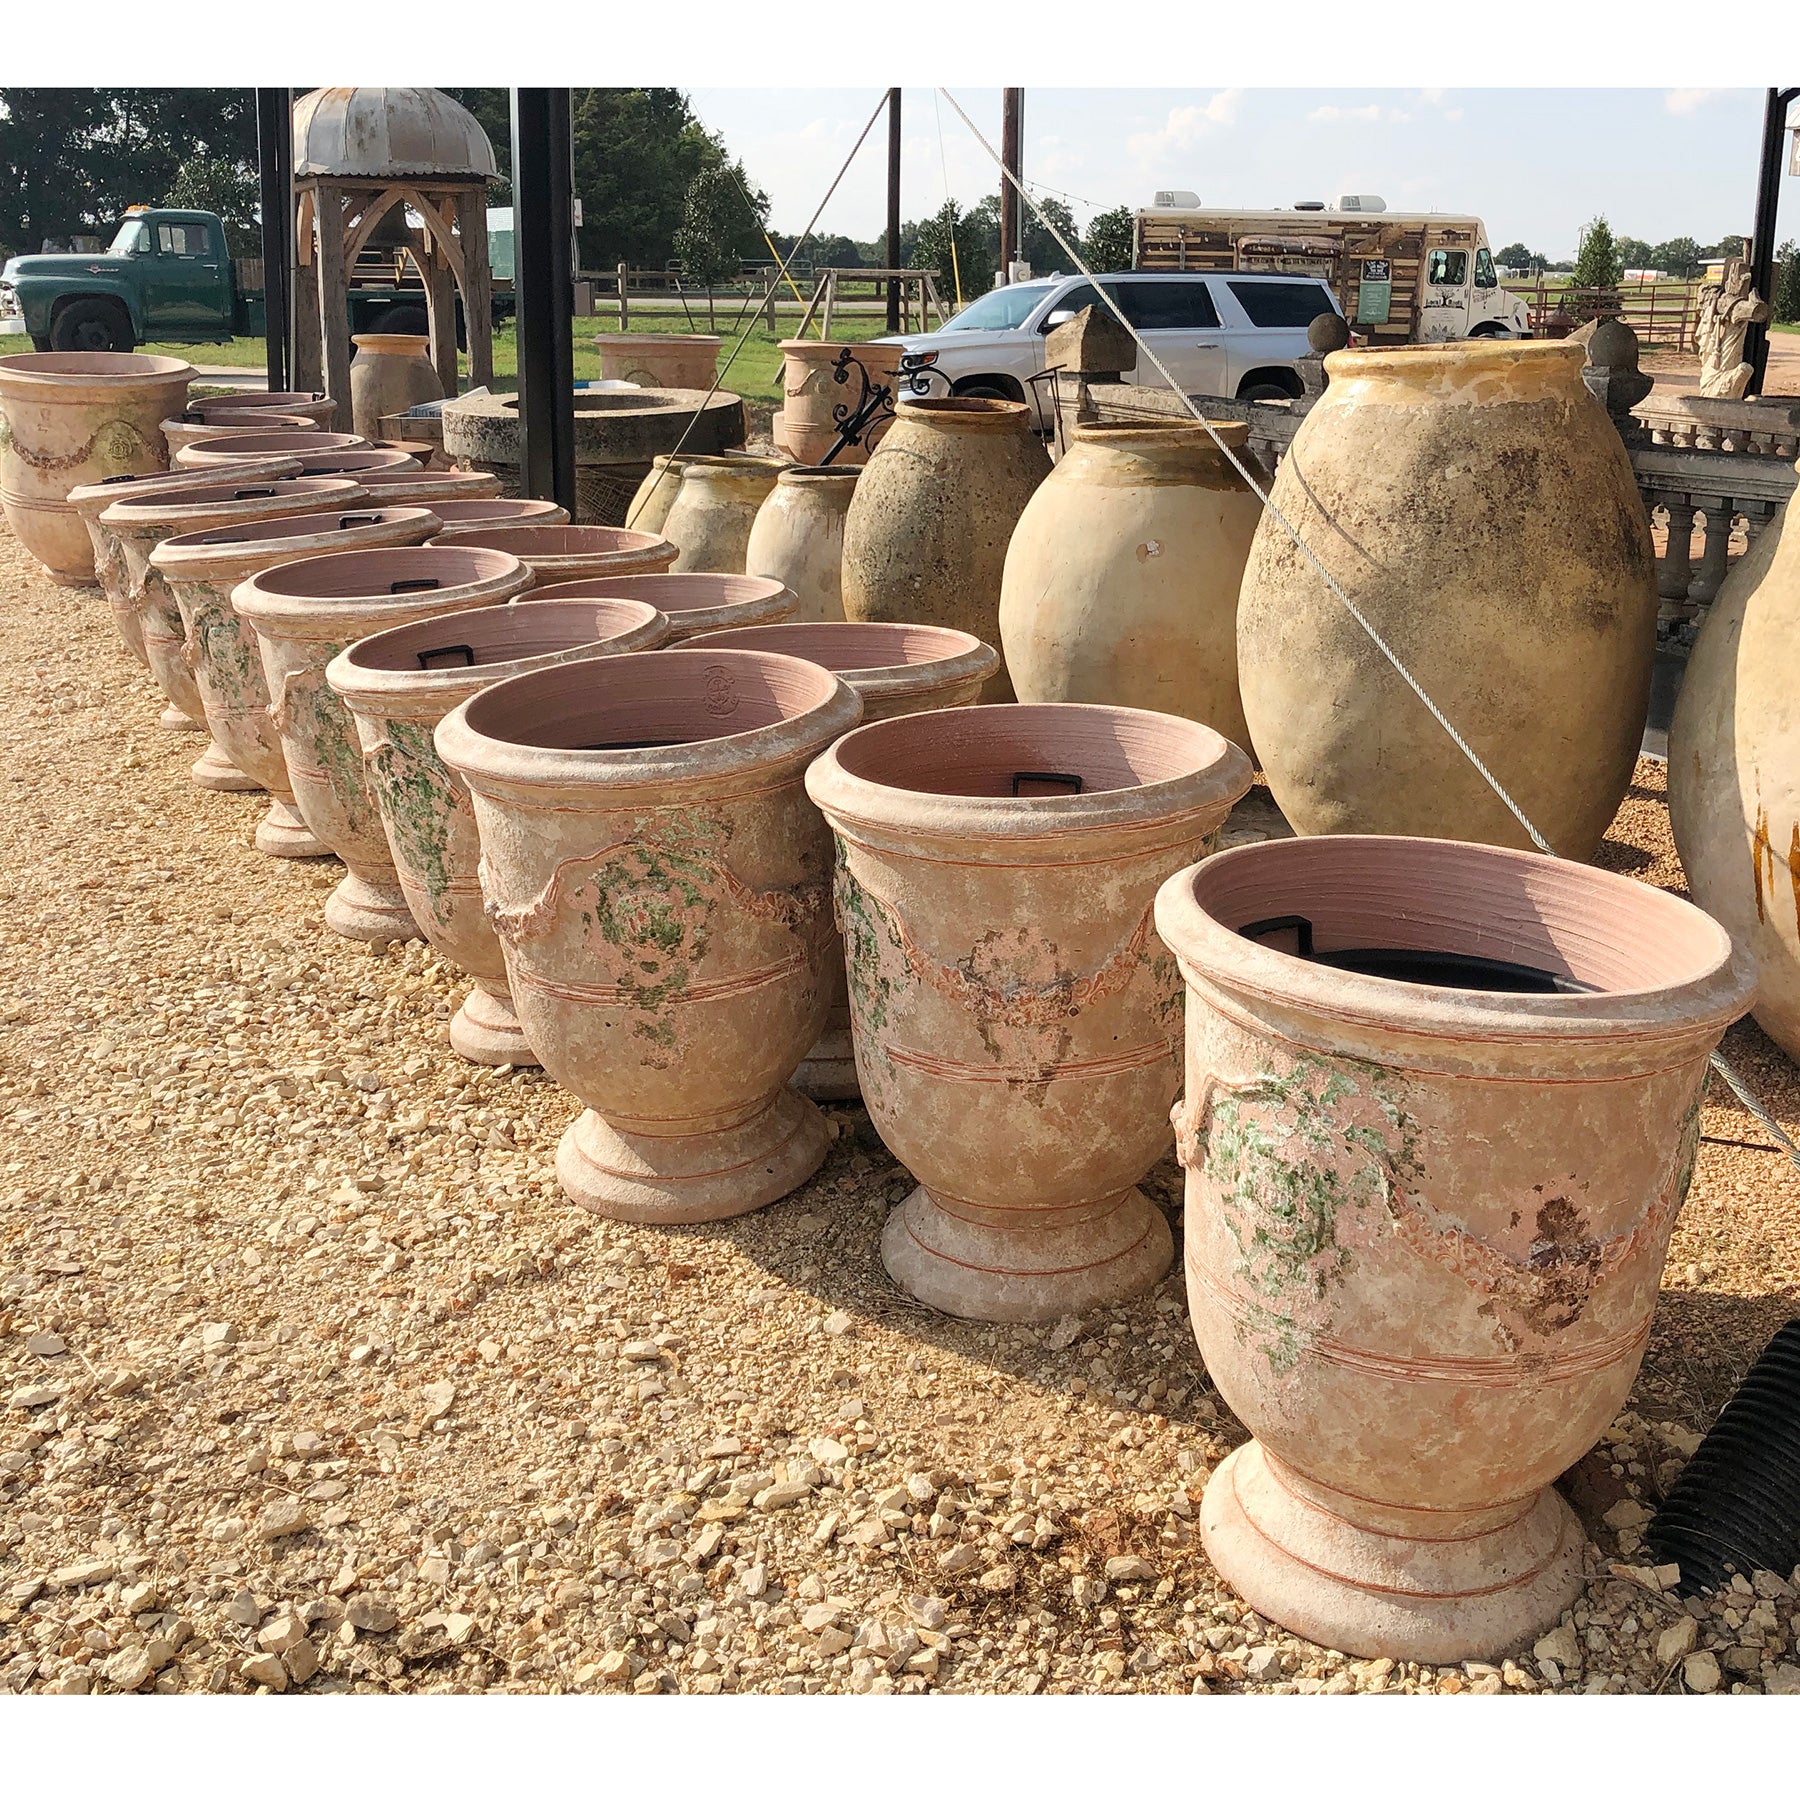 Anduze Versailles '34' Terracotta Pot (8 available in Round Top)